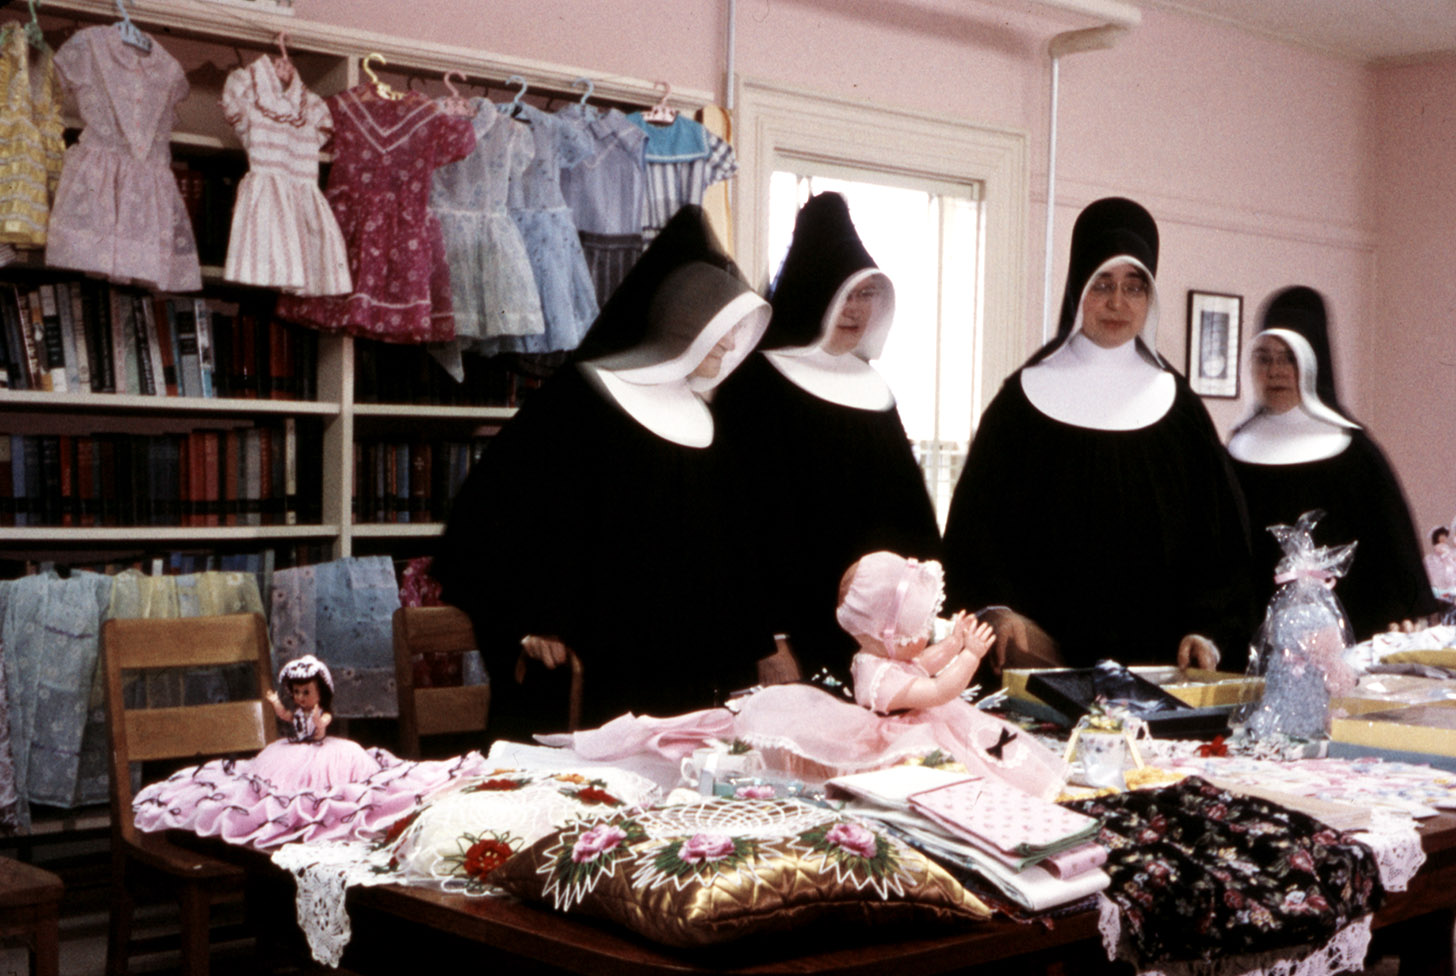 communityalbums - Sisters of Charity-Halifax with goods made for Fall Fair, Saint Ambrose Convent, Yarmouth, Nova Scotia.